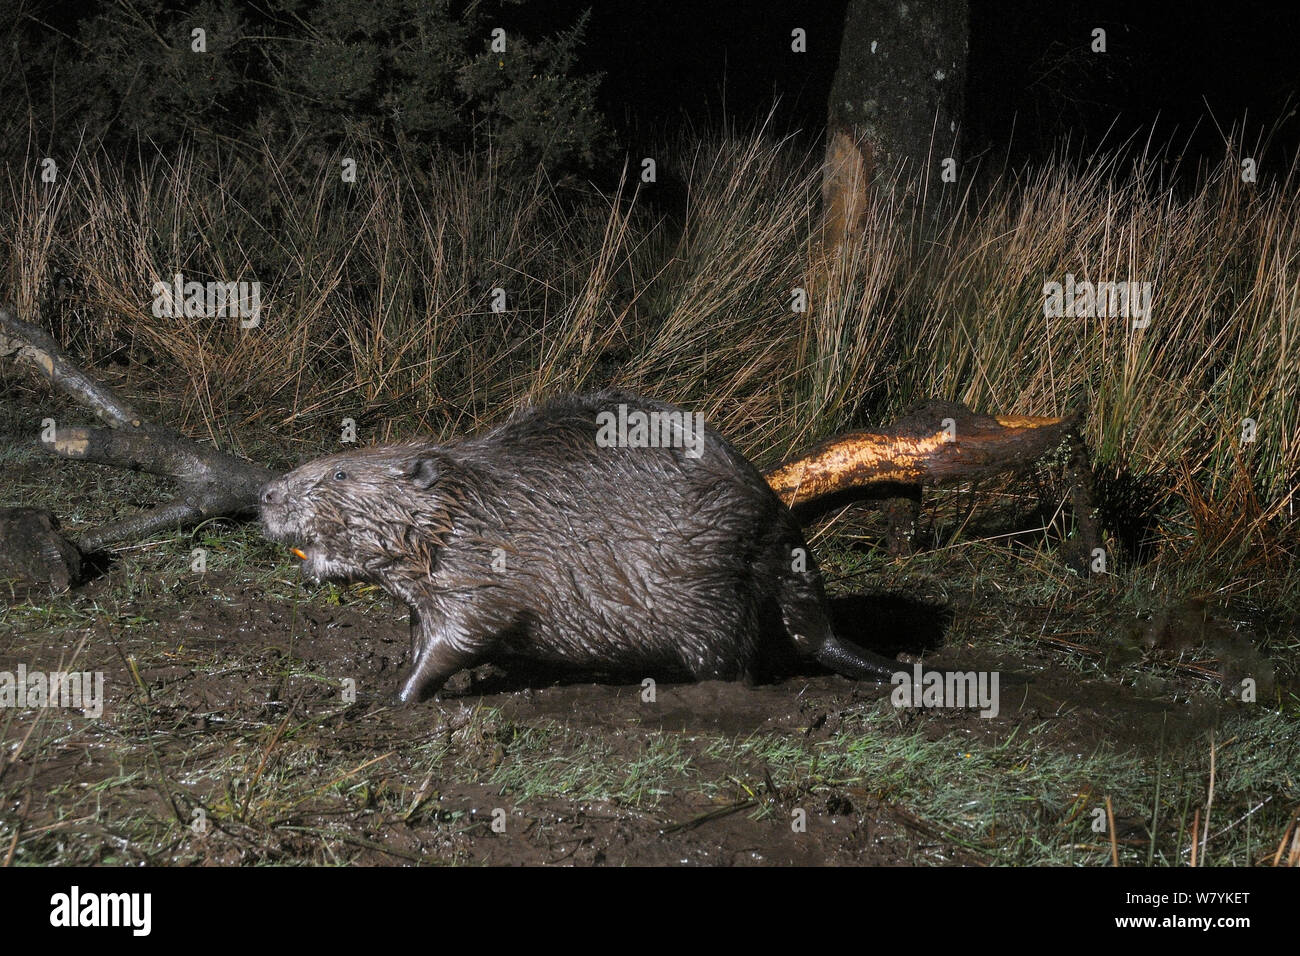 Eurasian beaver (Castor fiber) walking on the margins of pond in a woodland enclosure at night, with branch it has cut and chewed in the background.  Devon Beaver Project, run by Devon Wildlife Trust, Devon, UK, March. Taken by a remote camera trap. Stock Photo